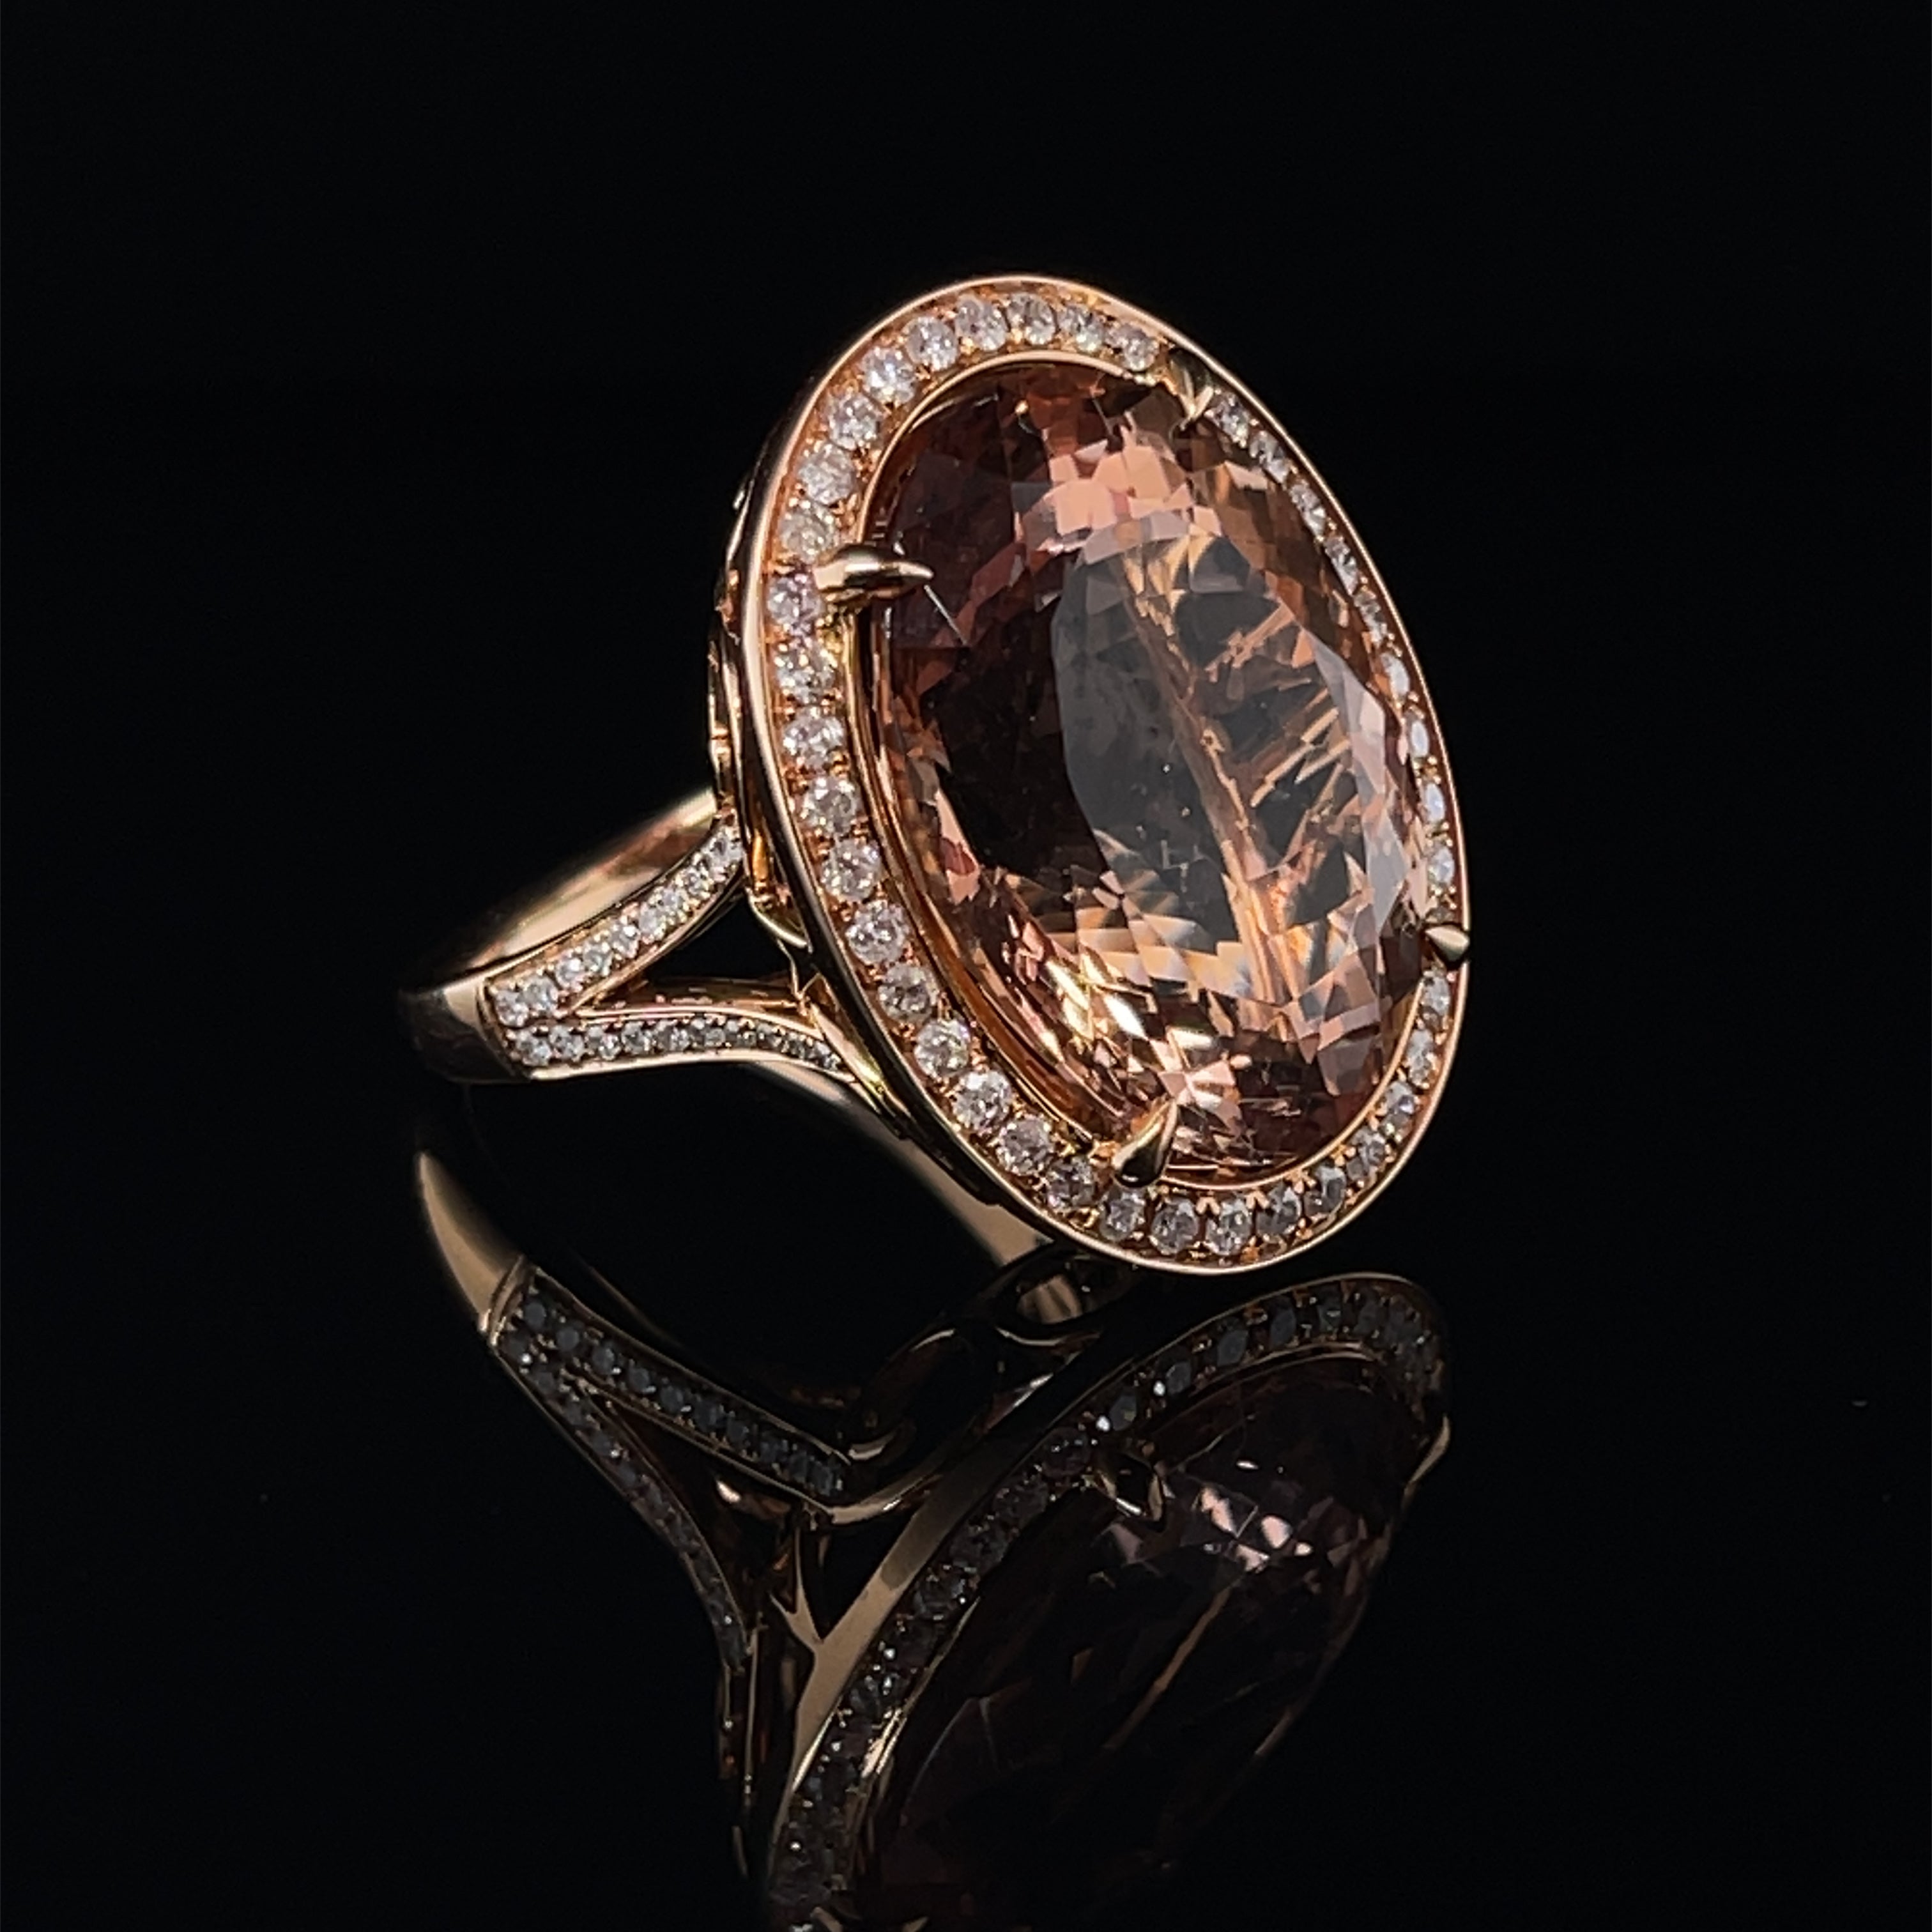 Oval shaped Morganite, crafted with eighteen karat rose gold, featuring an elegant selection of eighty bead set round brilliant cut diamonds, complemented by a stunning polished finish design. 

Morganite Weight: 18.56ct

Morganite Colour: 